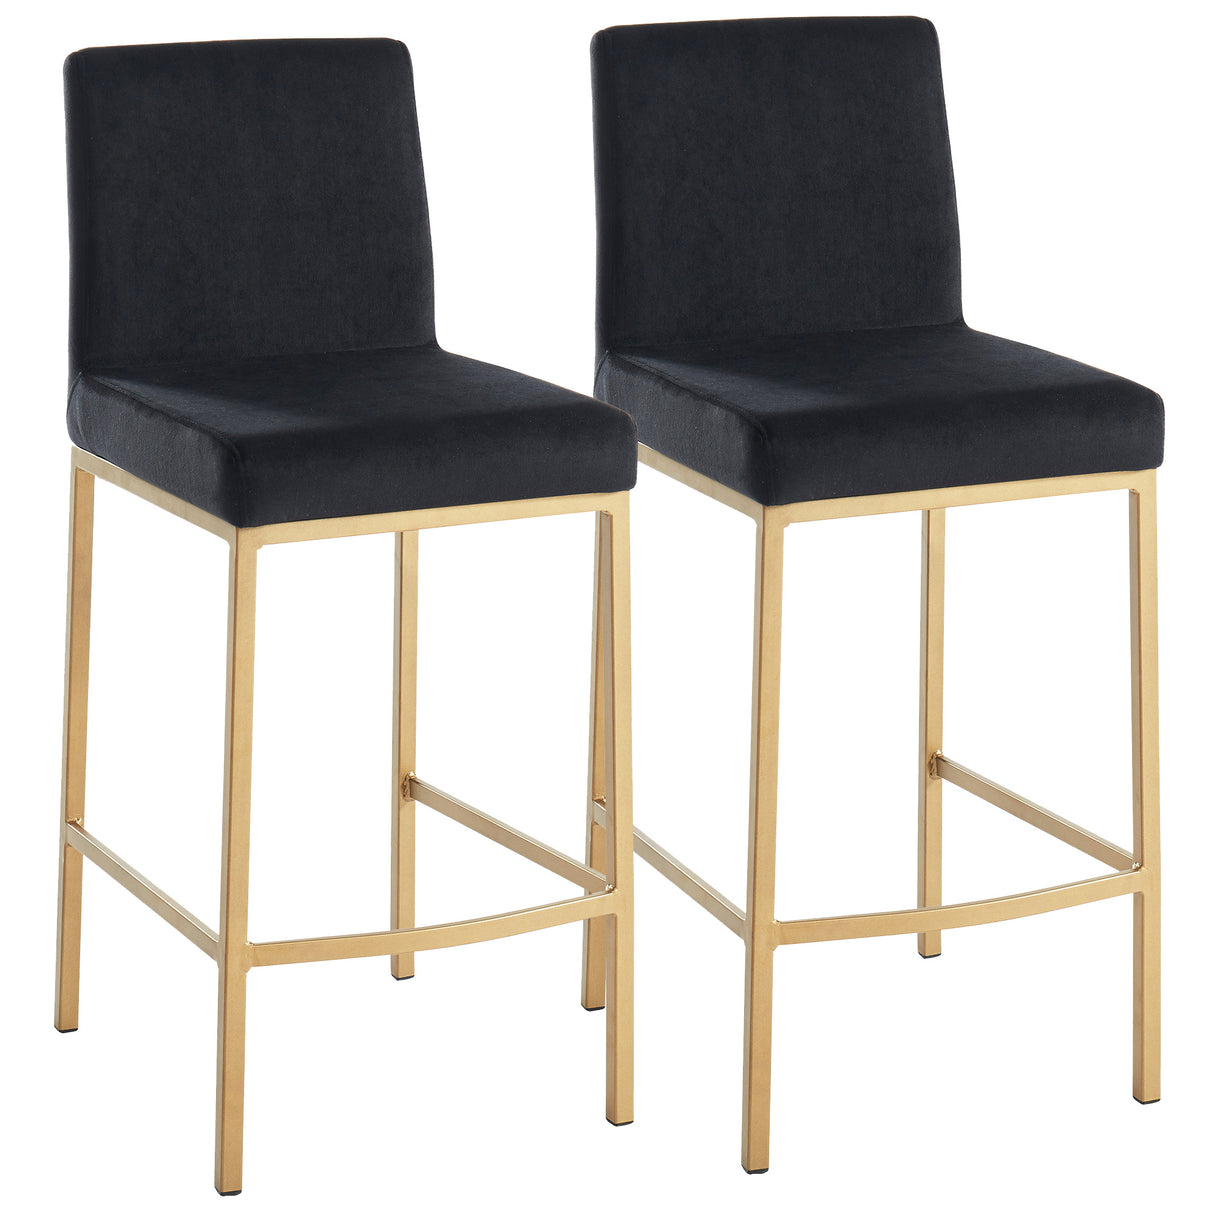 Diego 26" Counter Stool Black/Aged Gold (Set of 2)